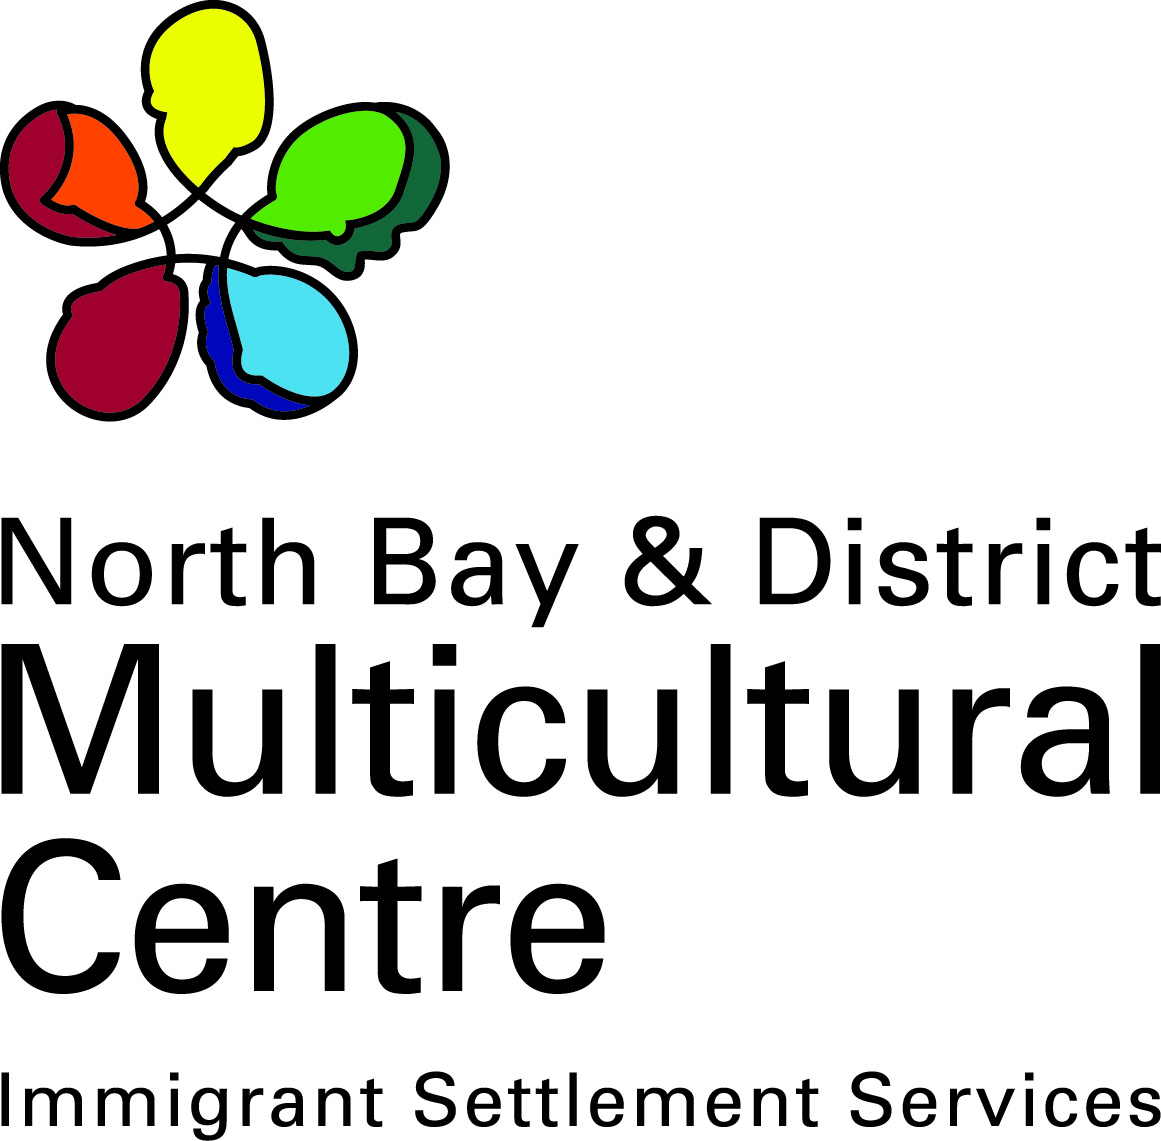 North Bay and District Multicultural Centre logo